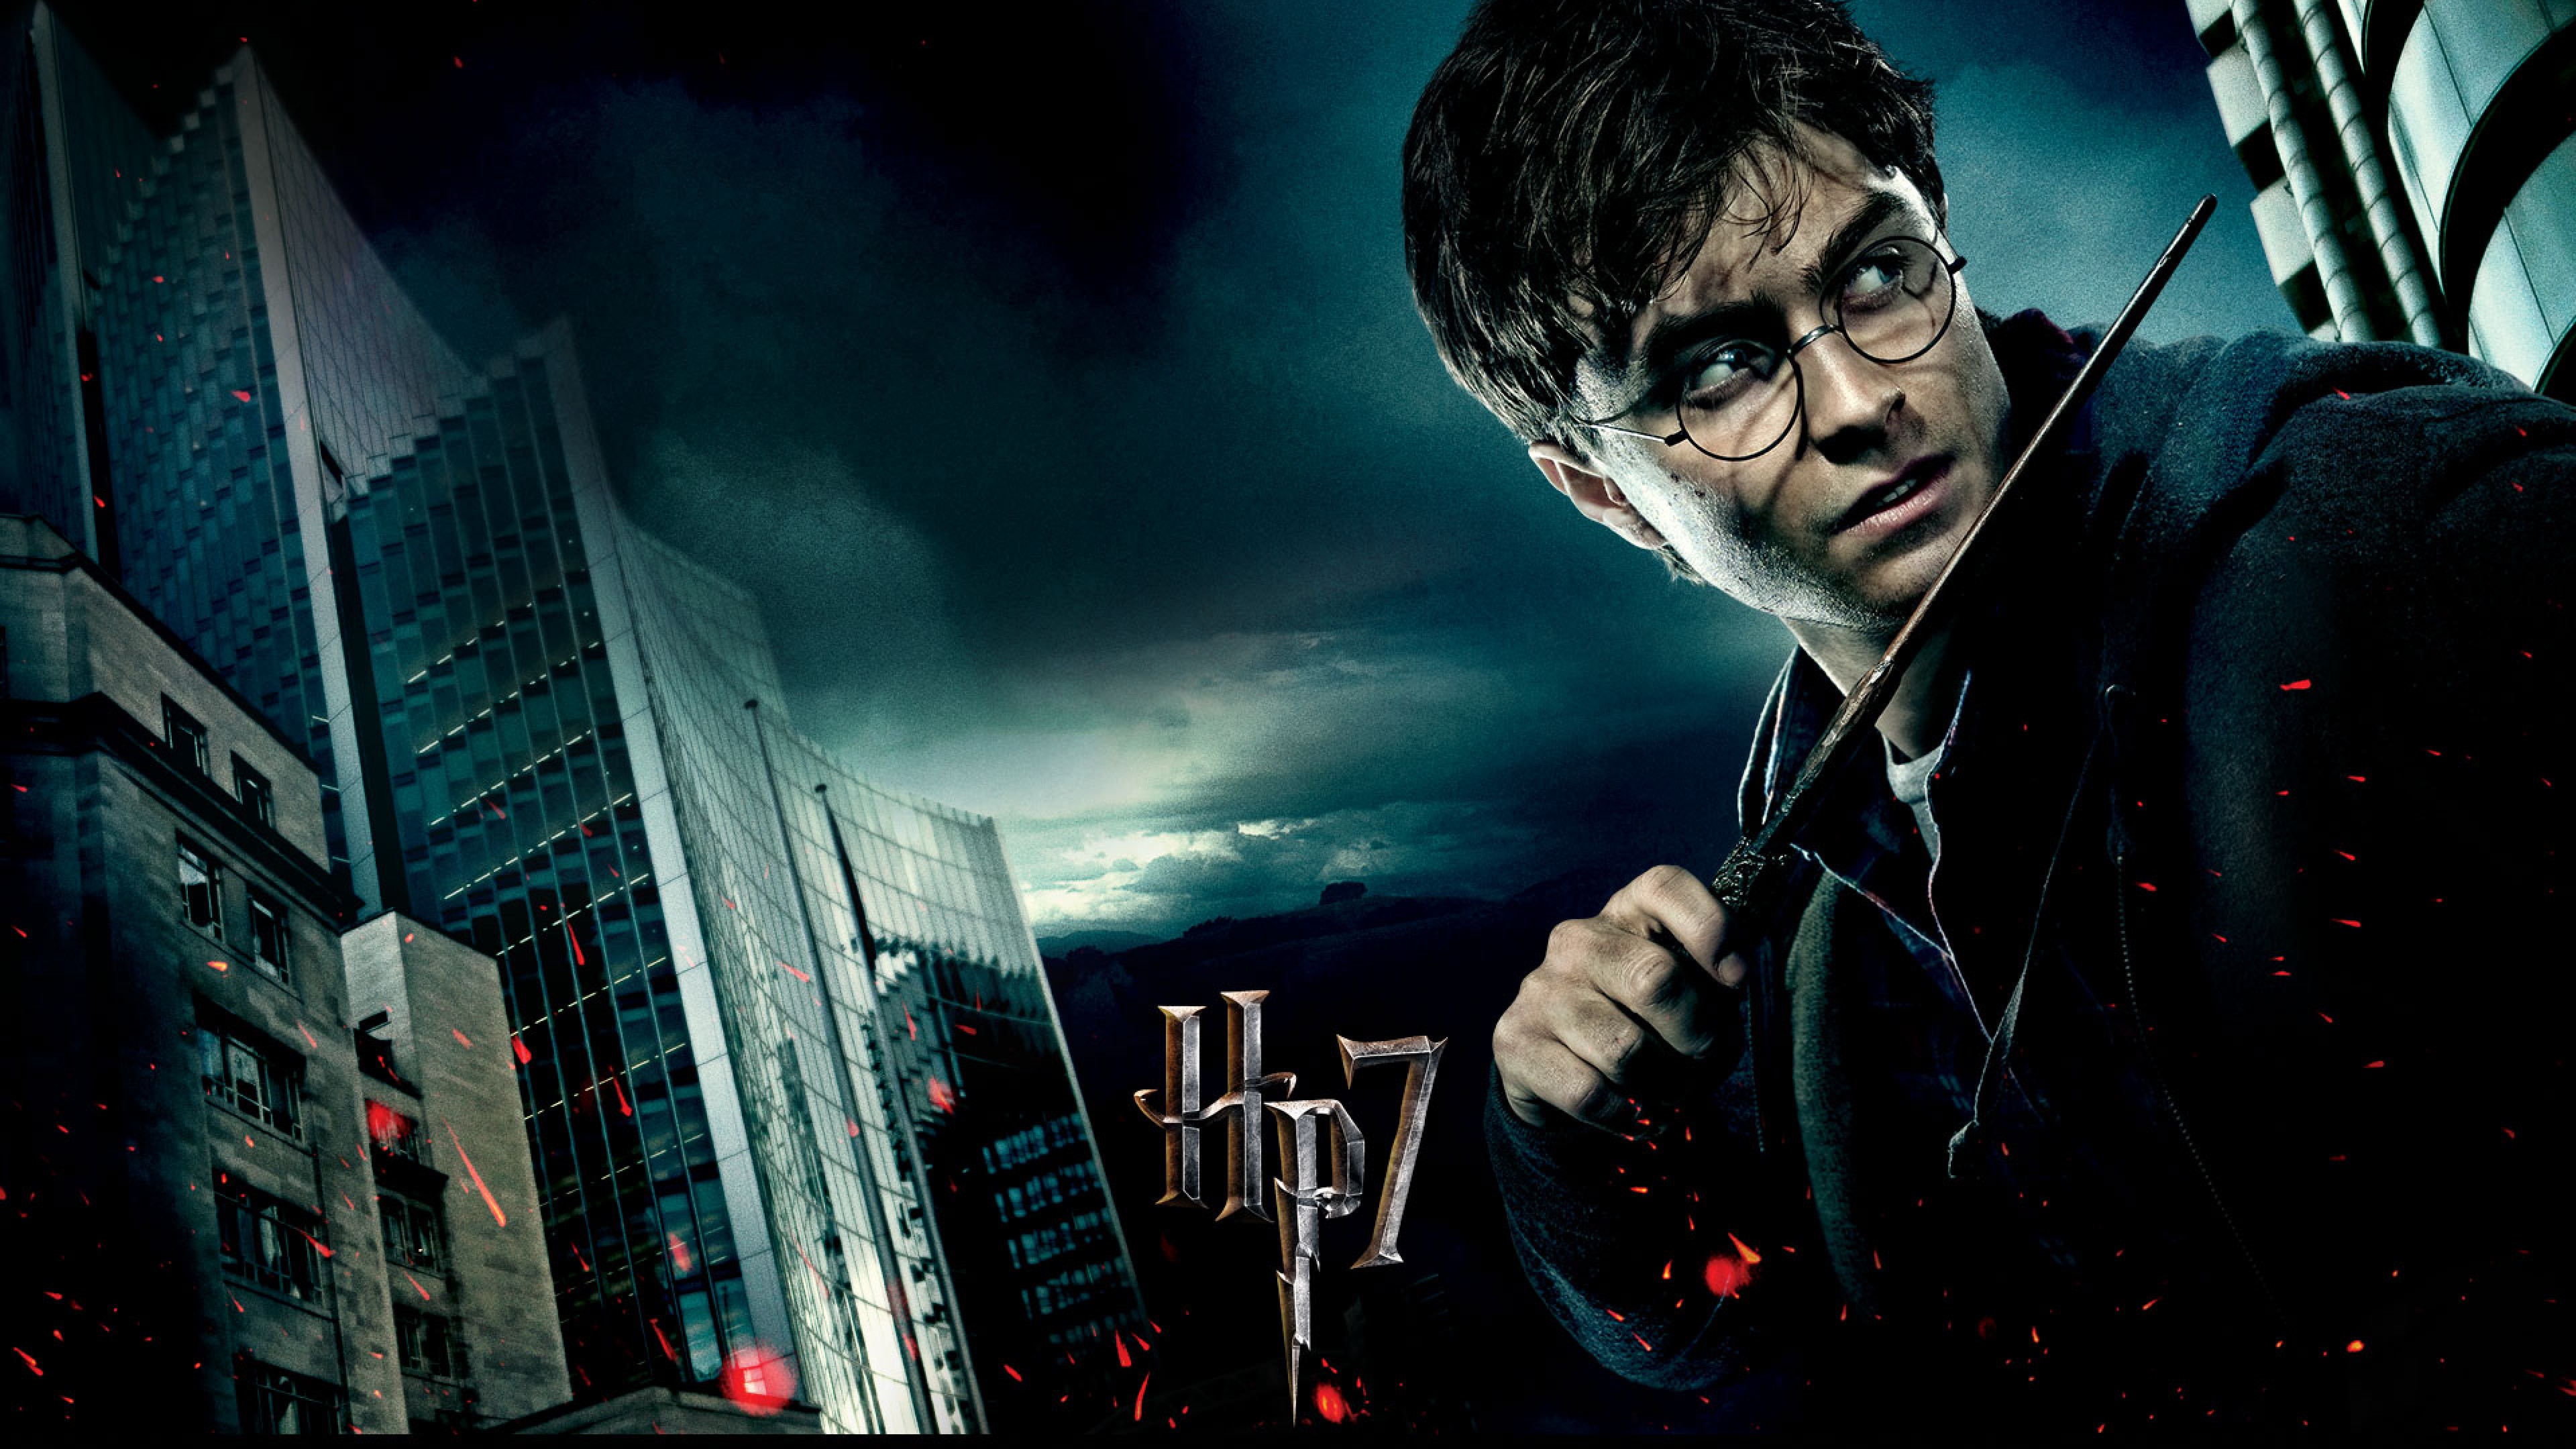 Harry Potter And Deathly Hallows Wallpapers for Desktop and